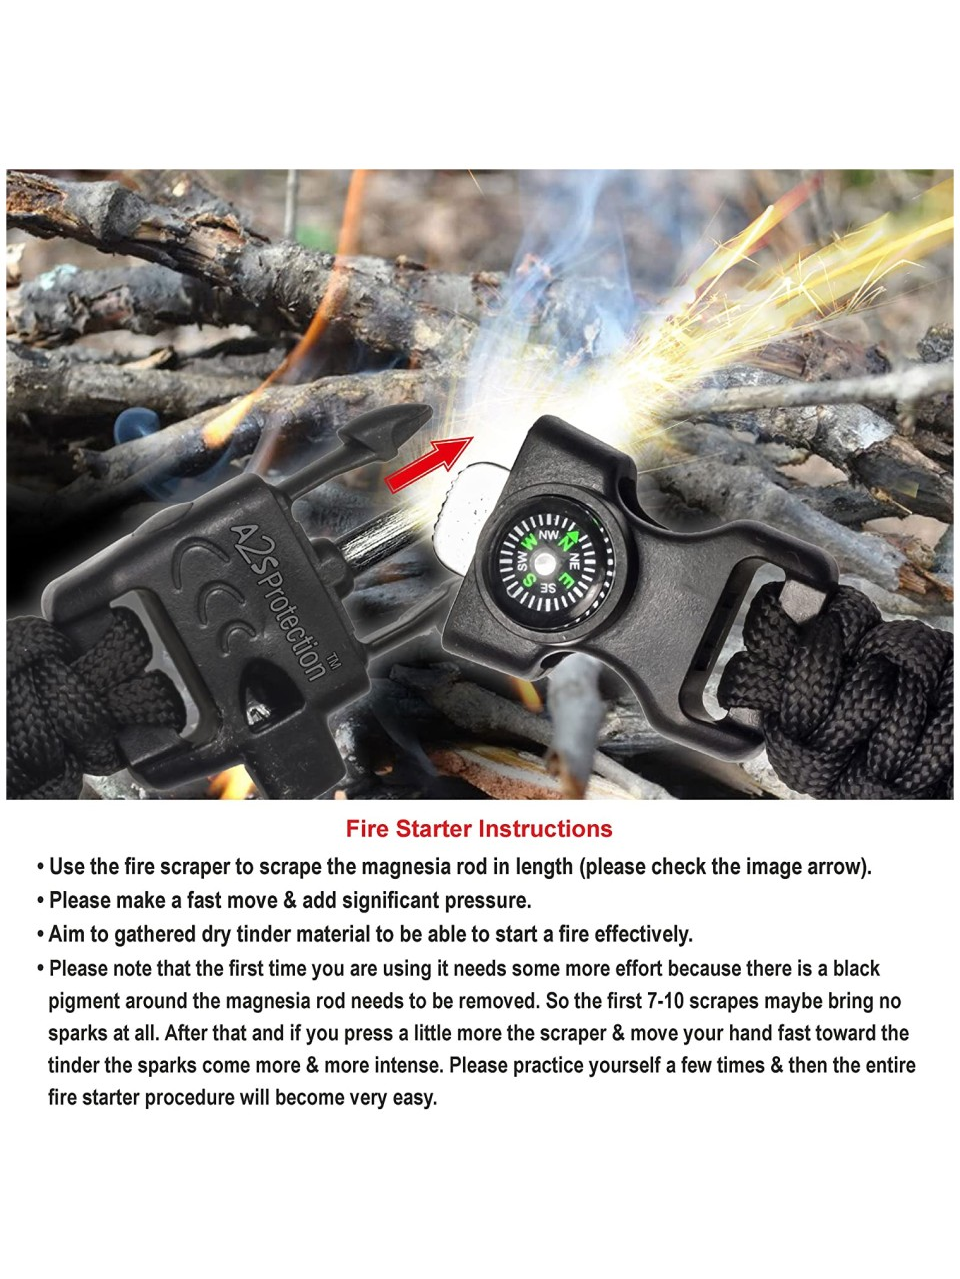 ZVR Fire Starter Bracelet Paracord Compass, Camping With Flint, Whistle &  Knife Men & Women Price in India - Buy ZVR Fire Starter Bracelet Paracord  Compass, Camping With Flint, Whistle & Knife